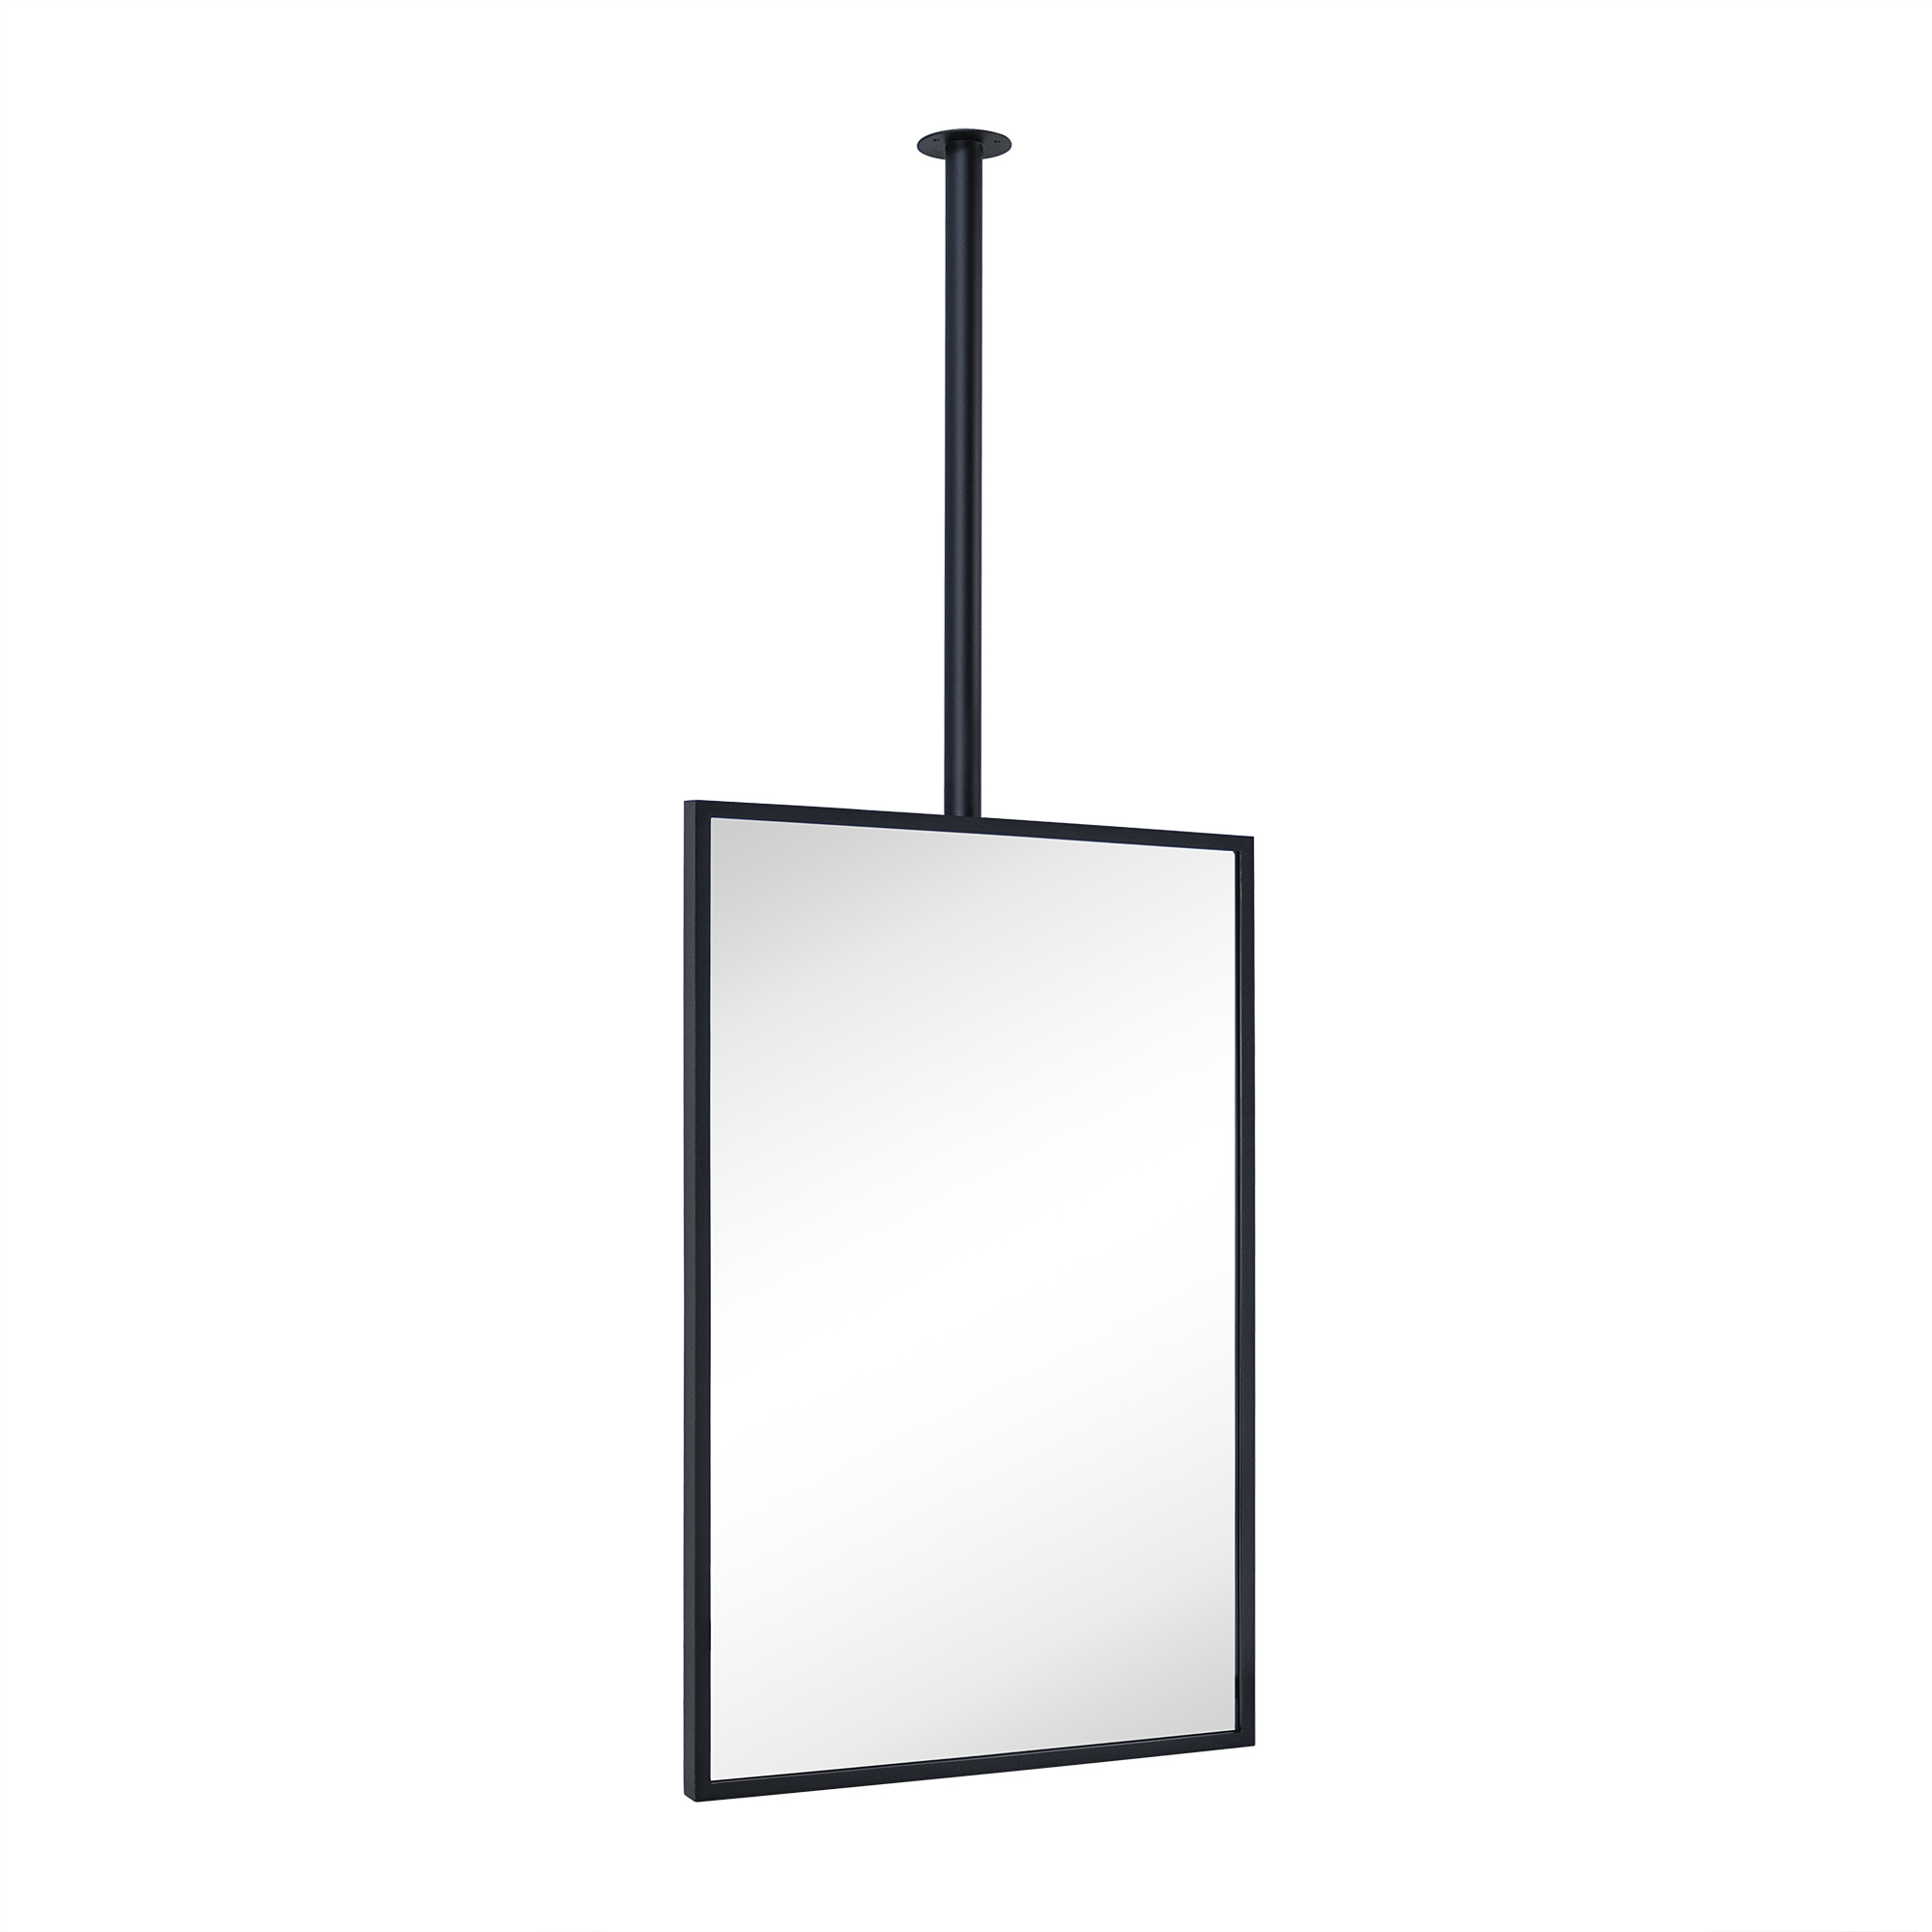 TEHOME Ceiling Mount Mirrors for bathrooms Suspend Black Metal Framed